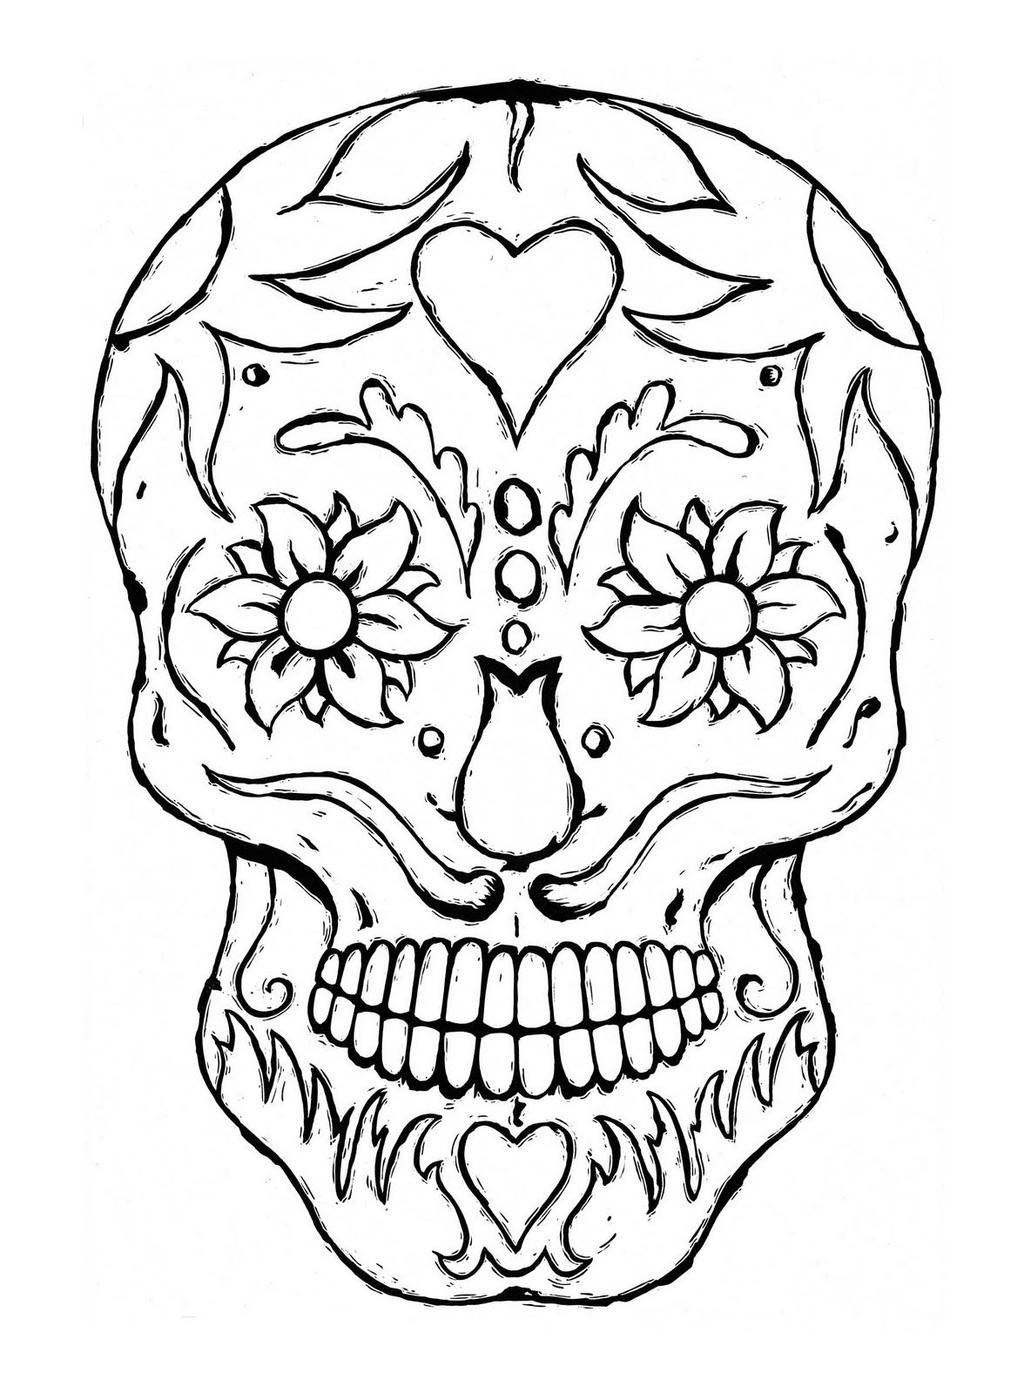 Boys Skull Coloring Pages
 Skulls Coloring Pages Day Dead for Boys Free Printable